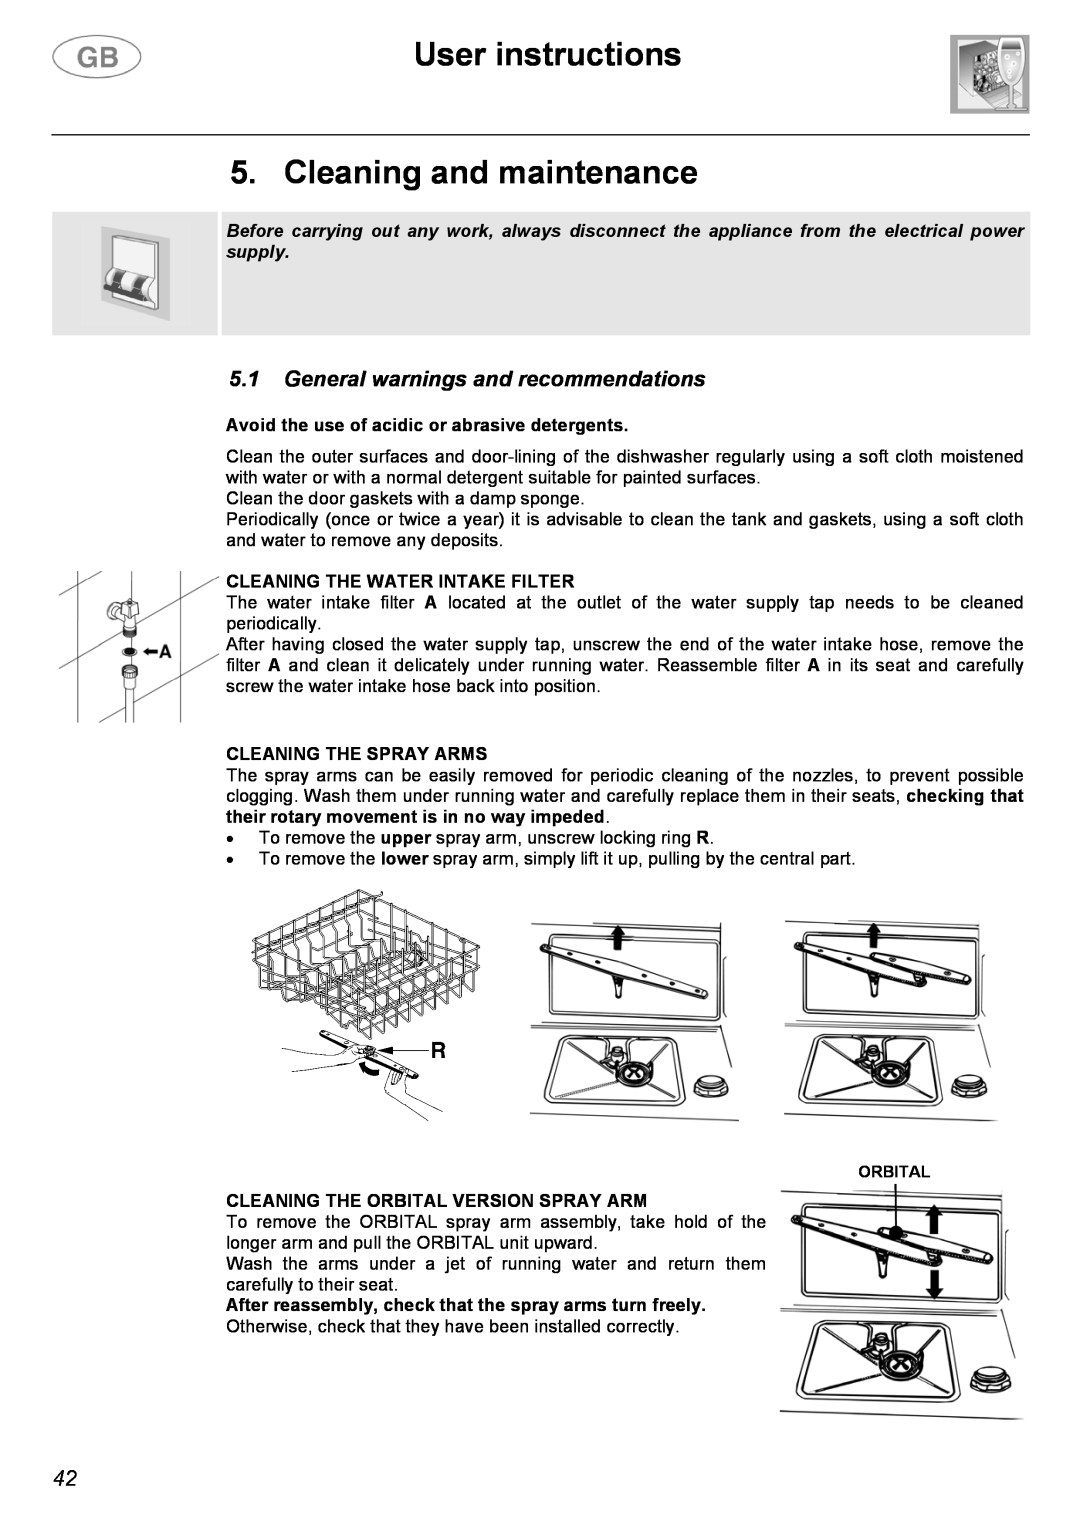 Smeg CA01-1 instruction manual User instructions 5. Cleaning and maintenance, 5.1General warnings and recommendations 